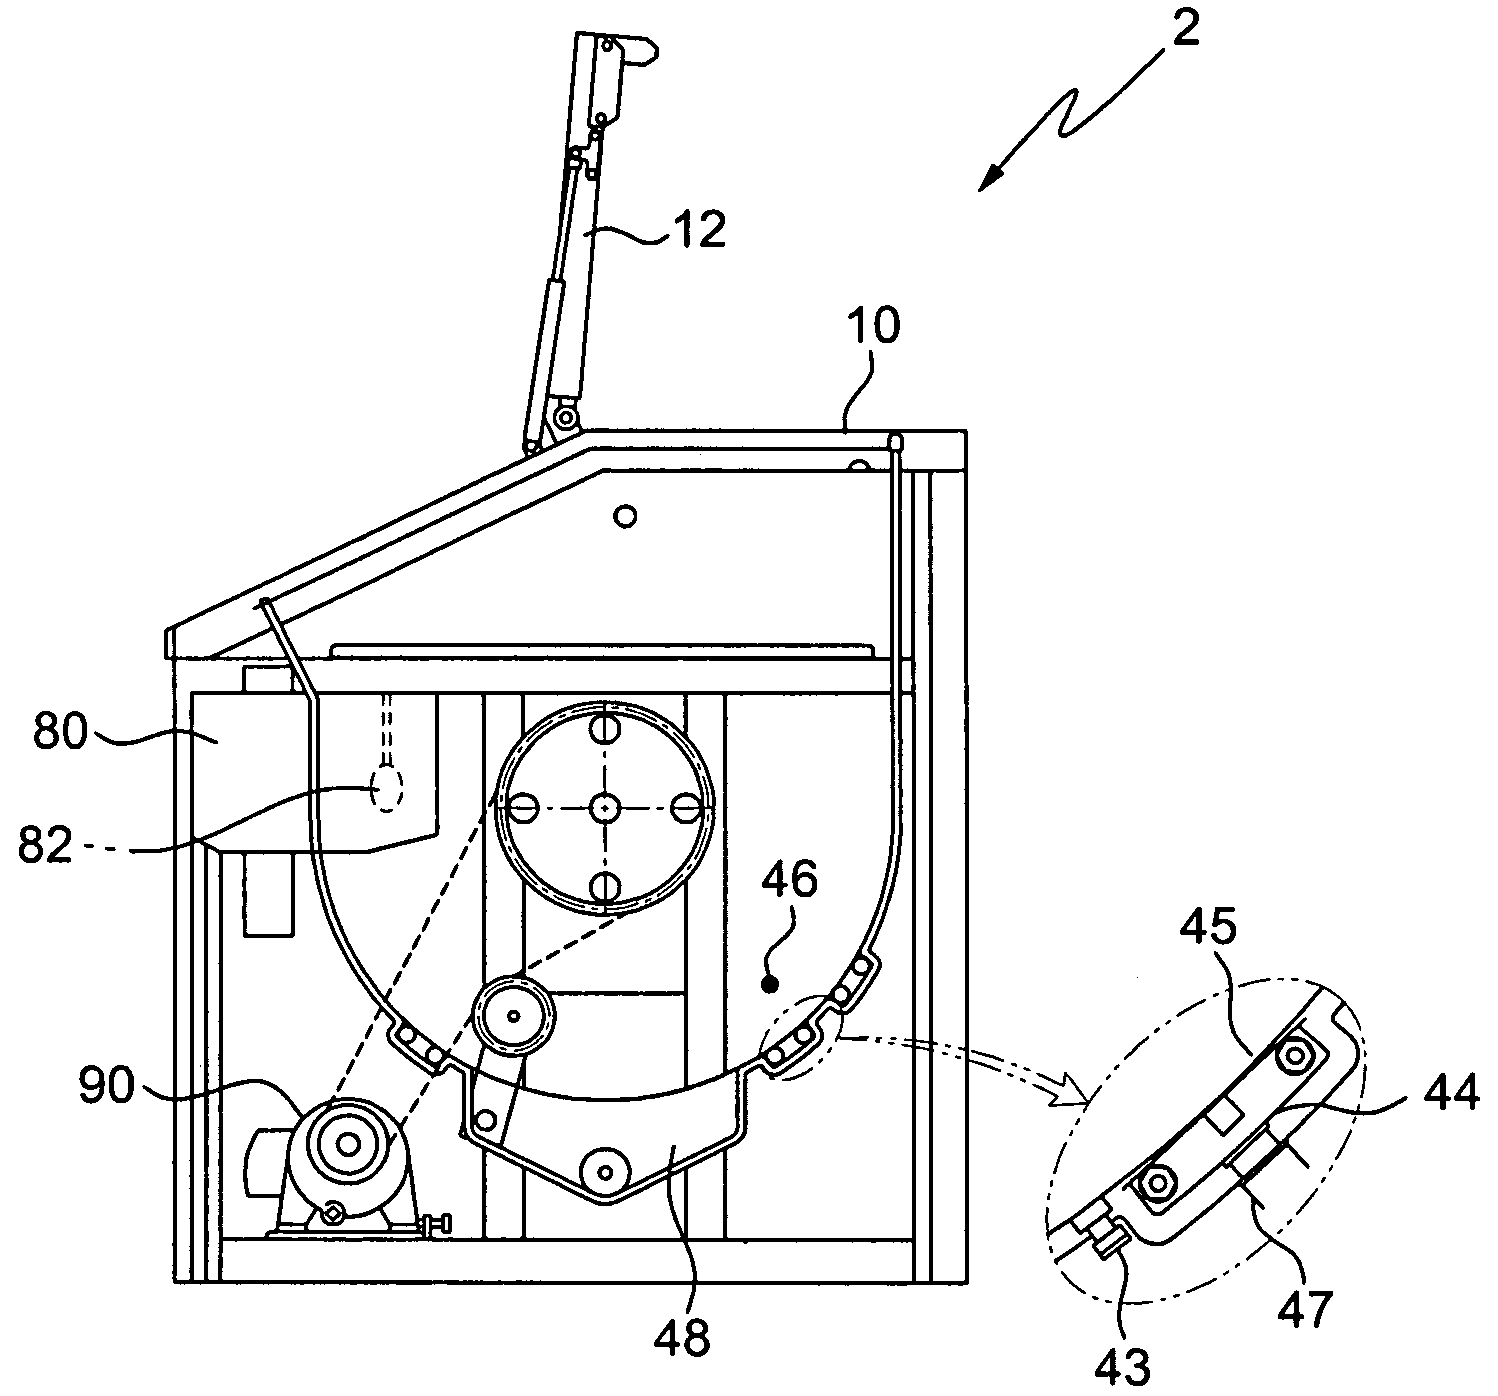 Automatic treatment system of leftover food treating device